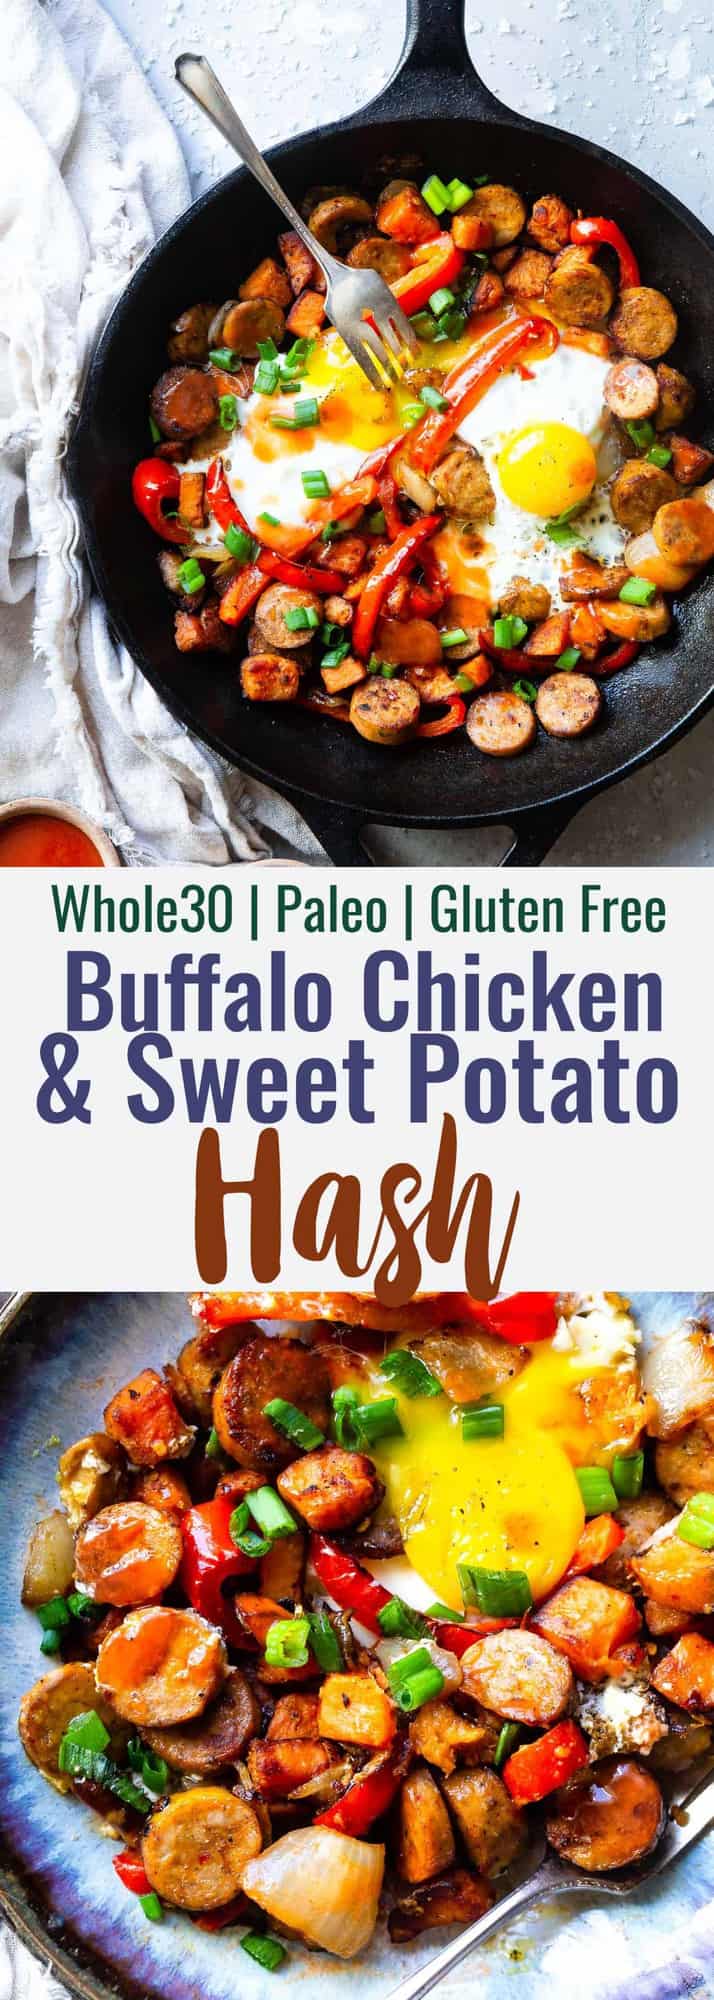 Buffalo Chicken Paleo Sweet Potato Hash - A game day spin on a classic breakfast that will be hit with even picky eaters! It's a quick and easy breakfast OR dinner that is paleo and whole30 compliant too! | #Foodfaithfitness | #Glutenfree #Paleo #Whole30 #Healthy #Dairyfree